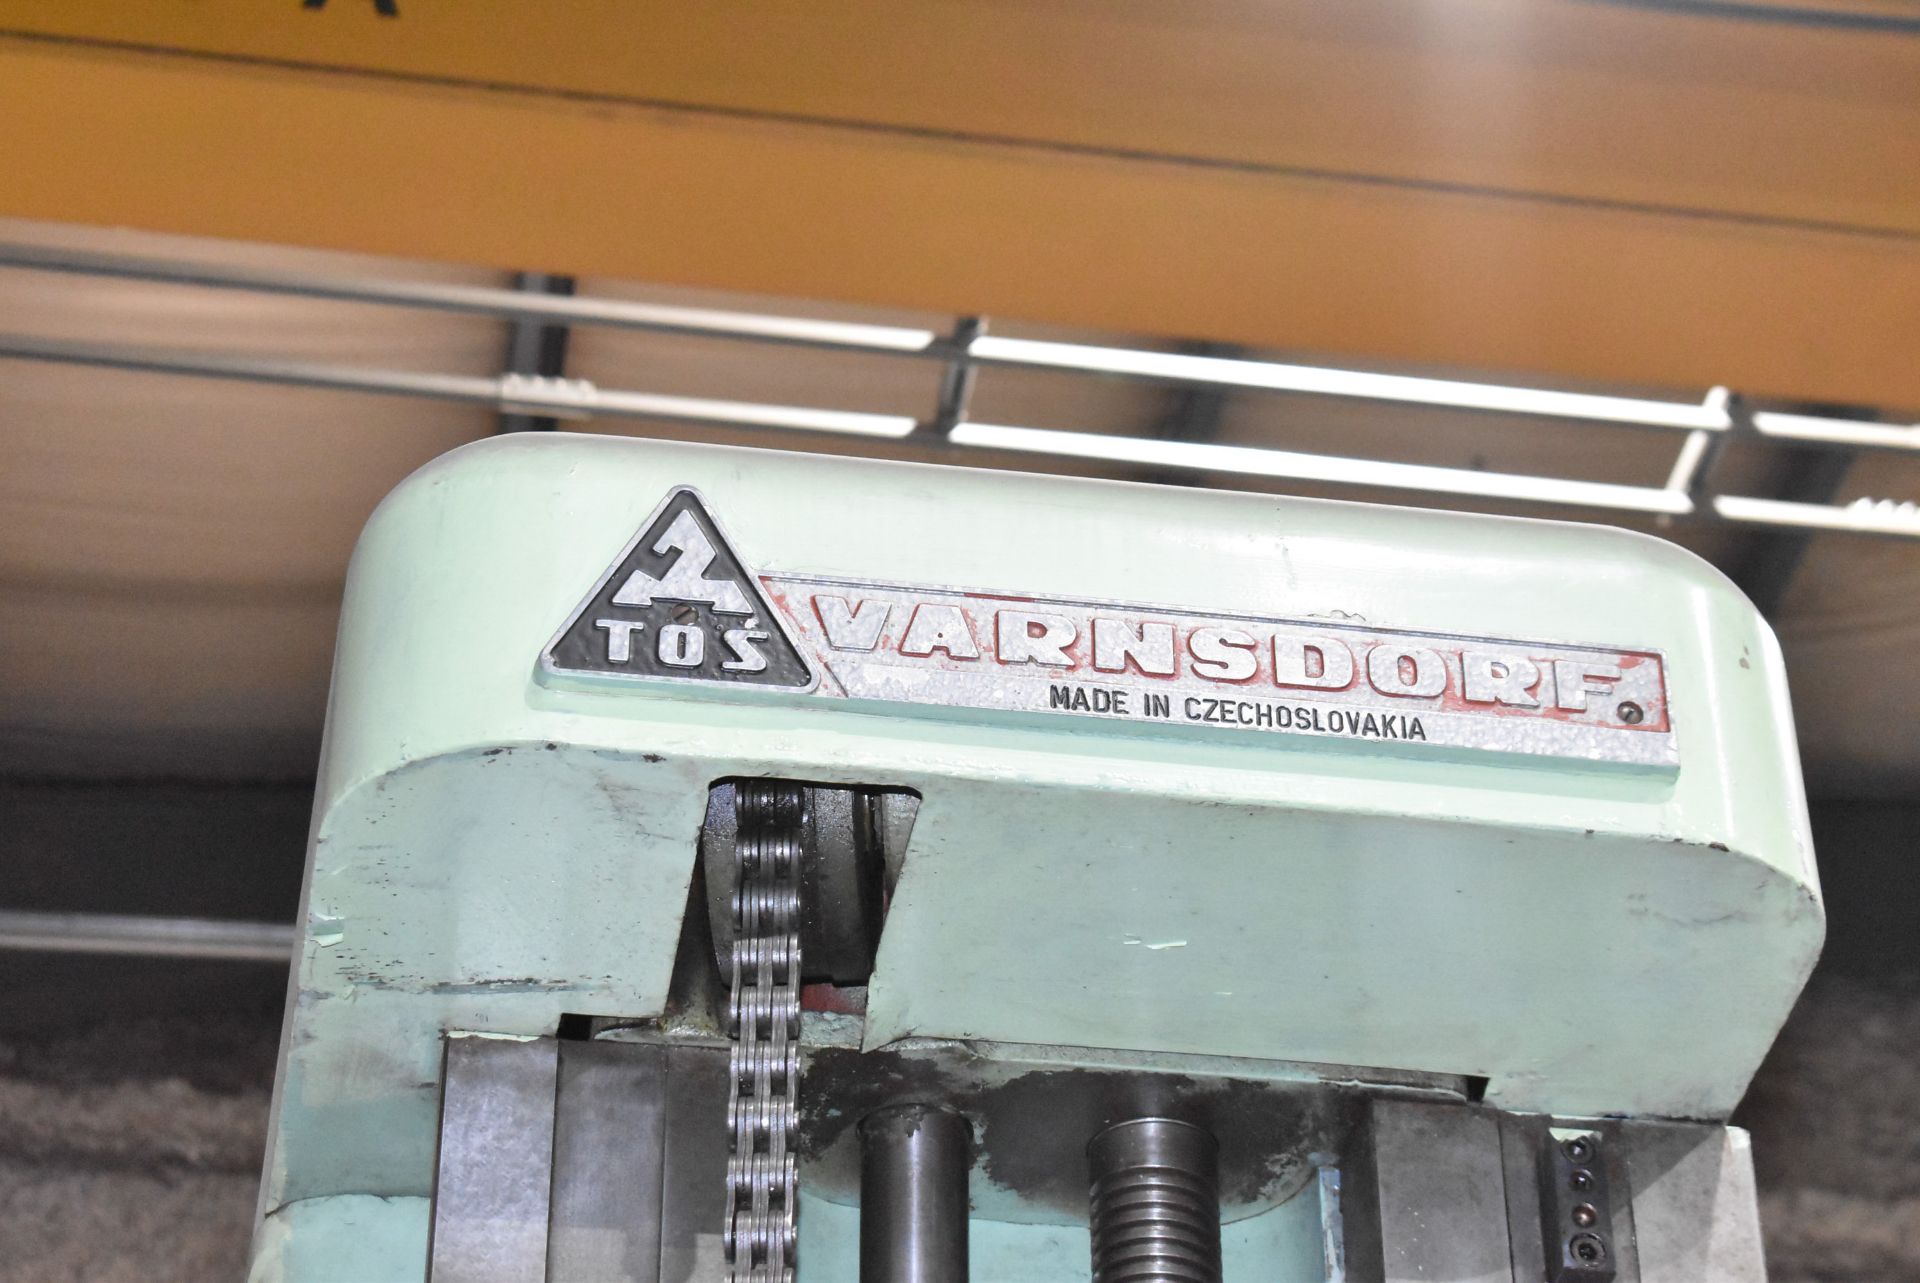 TOS VARNSDORF W100A TABLE TYPE HORIZONTAL BORING MILL WITH 4" SPINDLE, 49.2" X 49.2" ROTARY POWER - Image 7 of 19